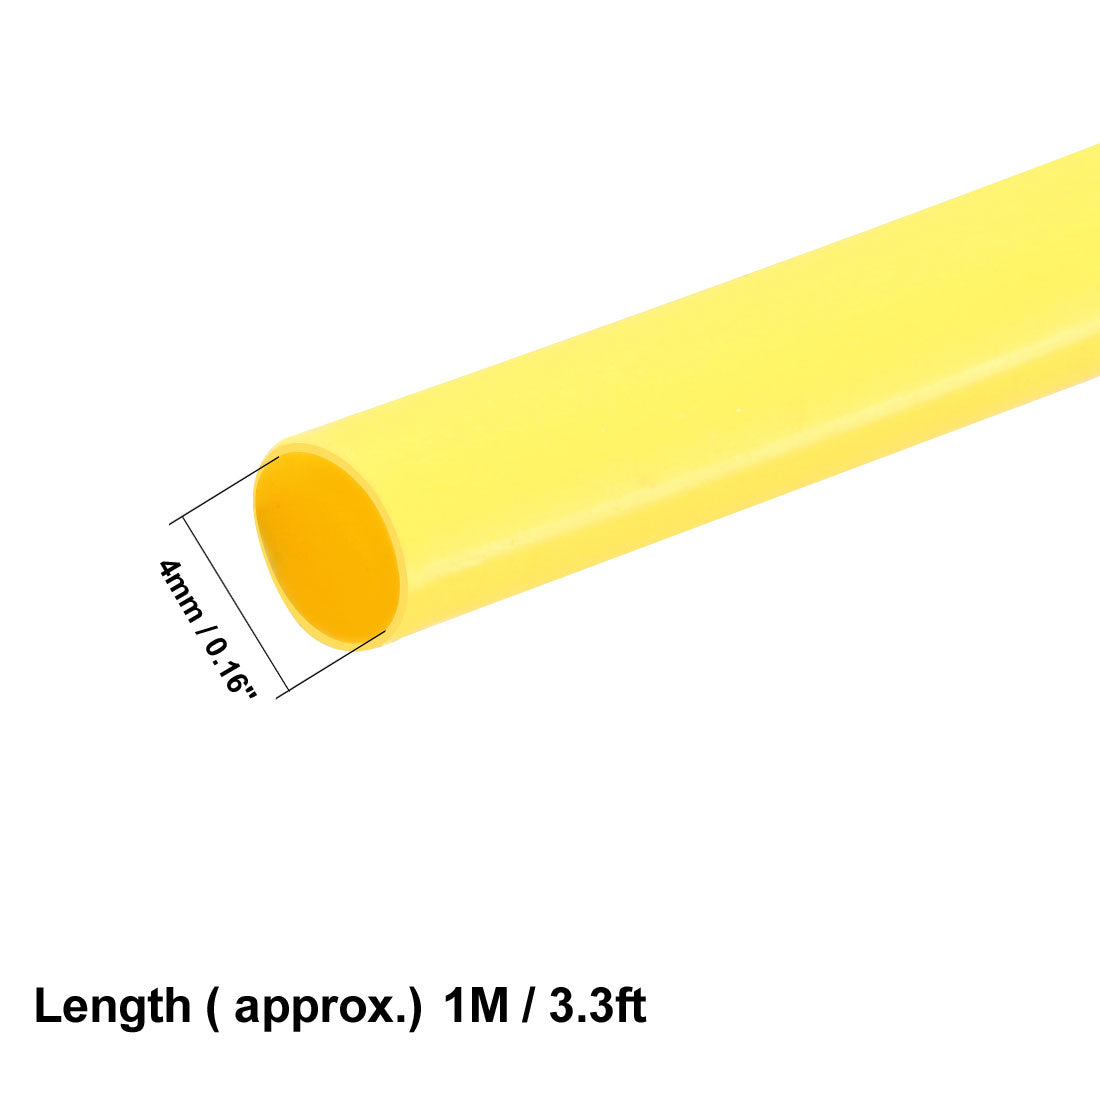 uxcell Uxcell Heat Shrink Tube 2:1 Electrical Insulation Tube Wire Cable Tubing Sleeving Wrap Yellow 4mm Diameter 1m Long